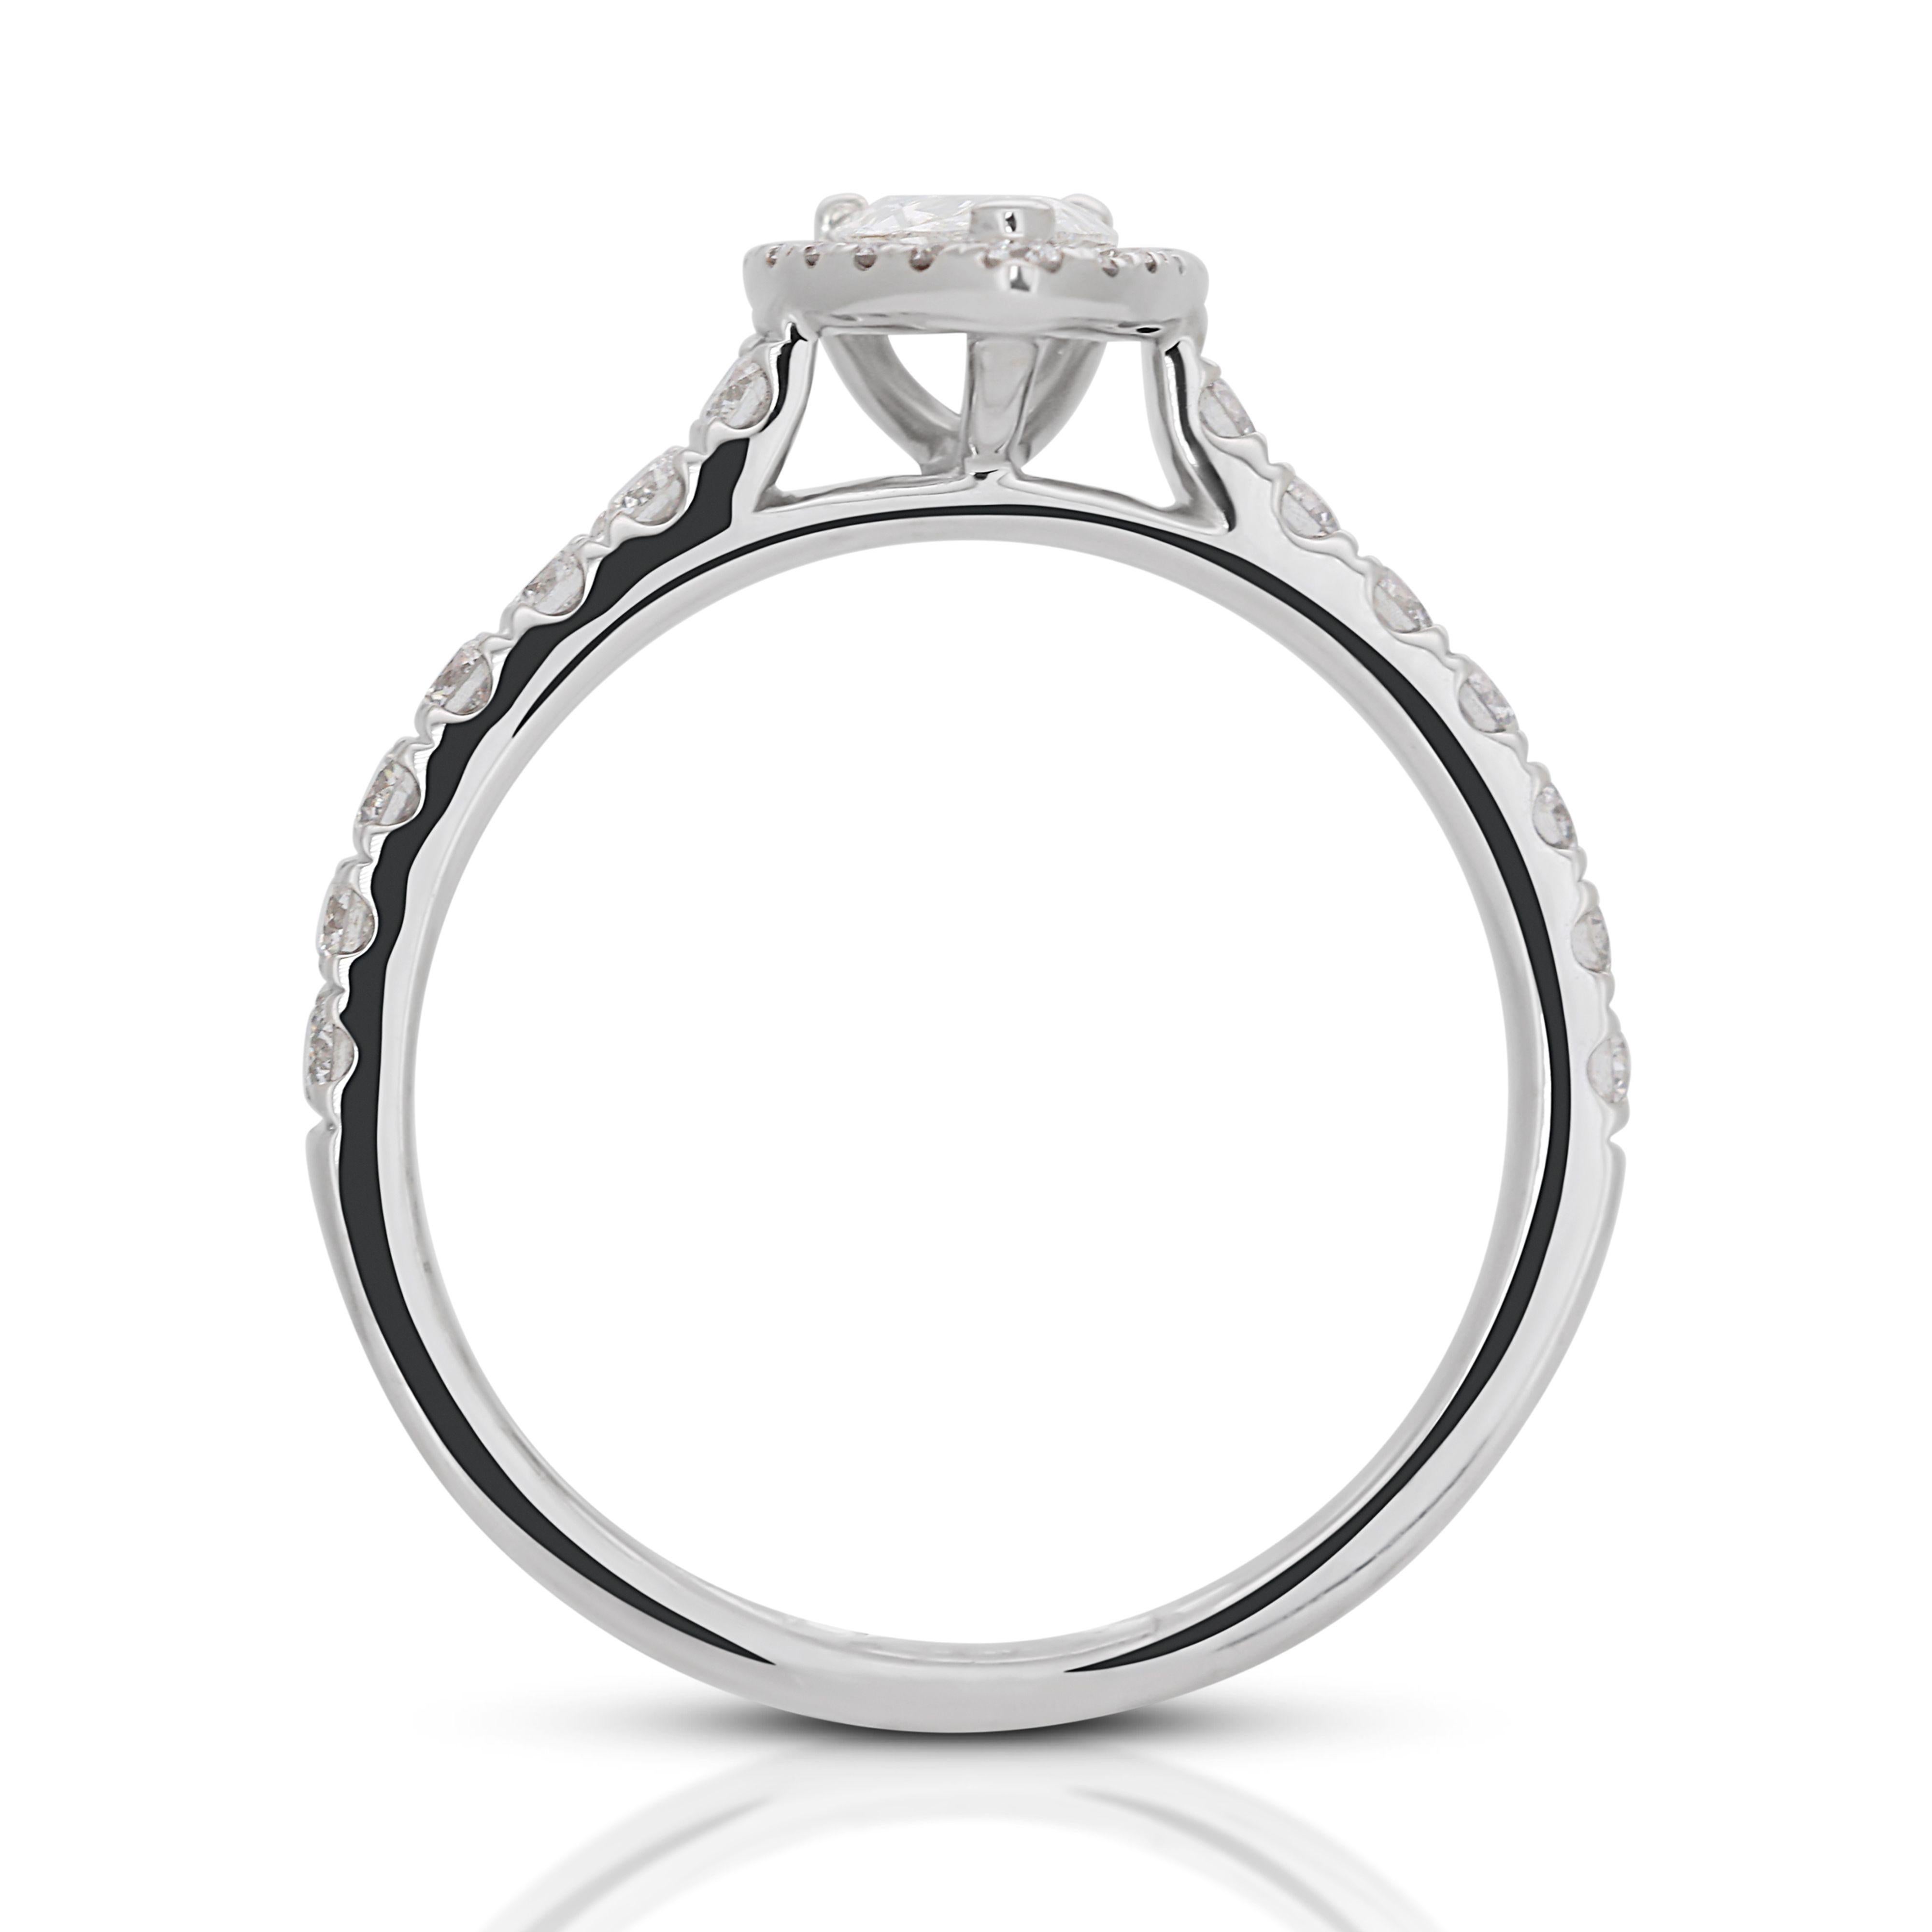 Elegant 18k White Gold with 0.71ct Pear-shaped Diamond Ring For Sale 1